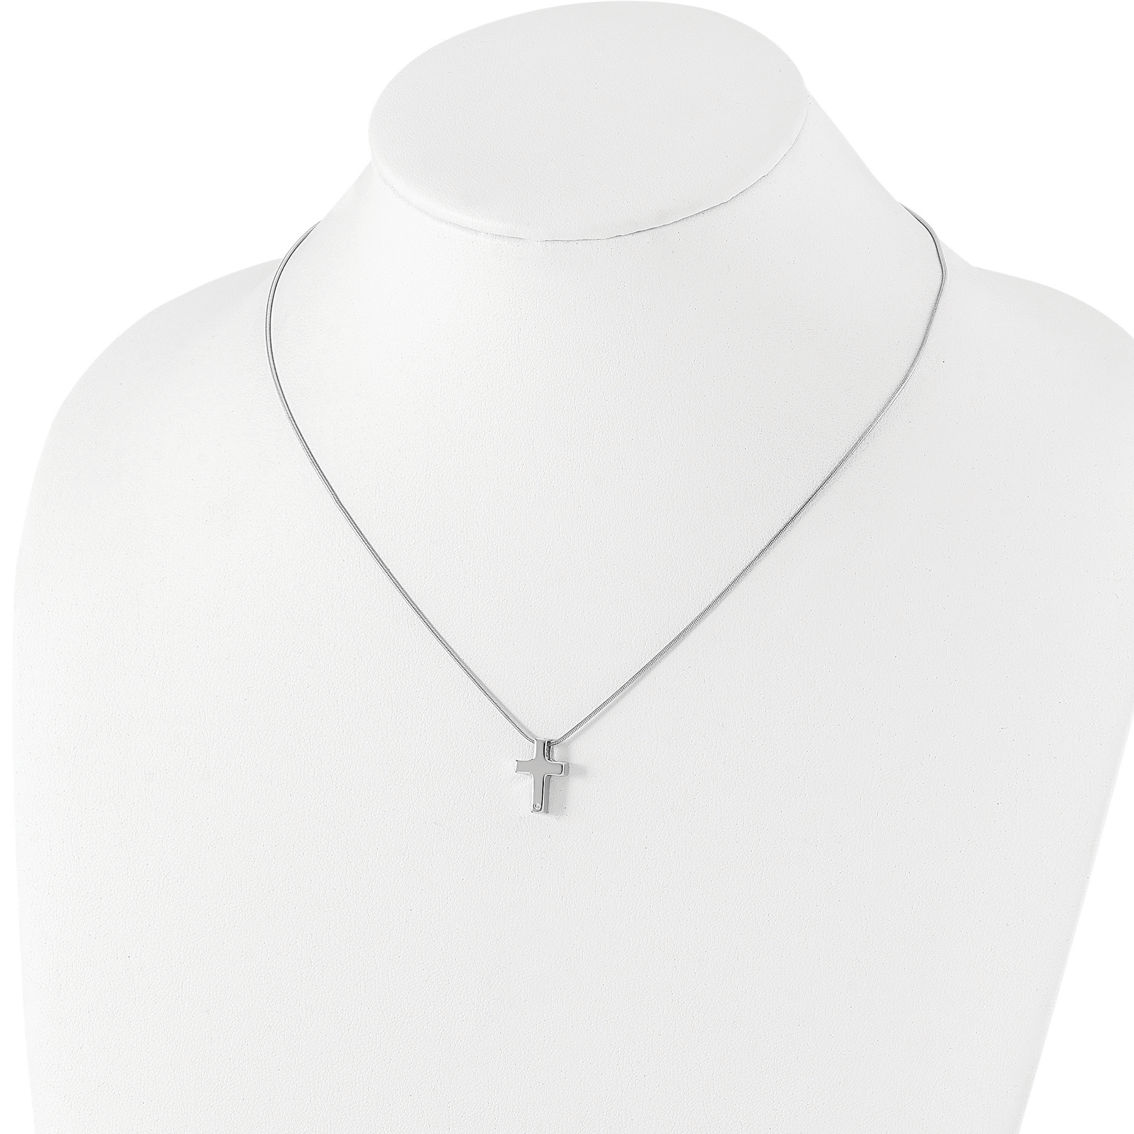 White Ice Sterling Silver Diamond Accent Cross Pendant - Image 3 of 3